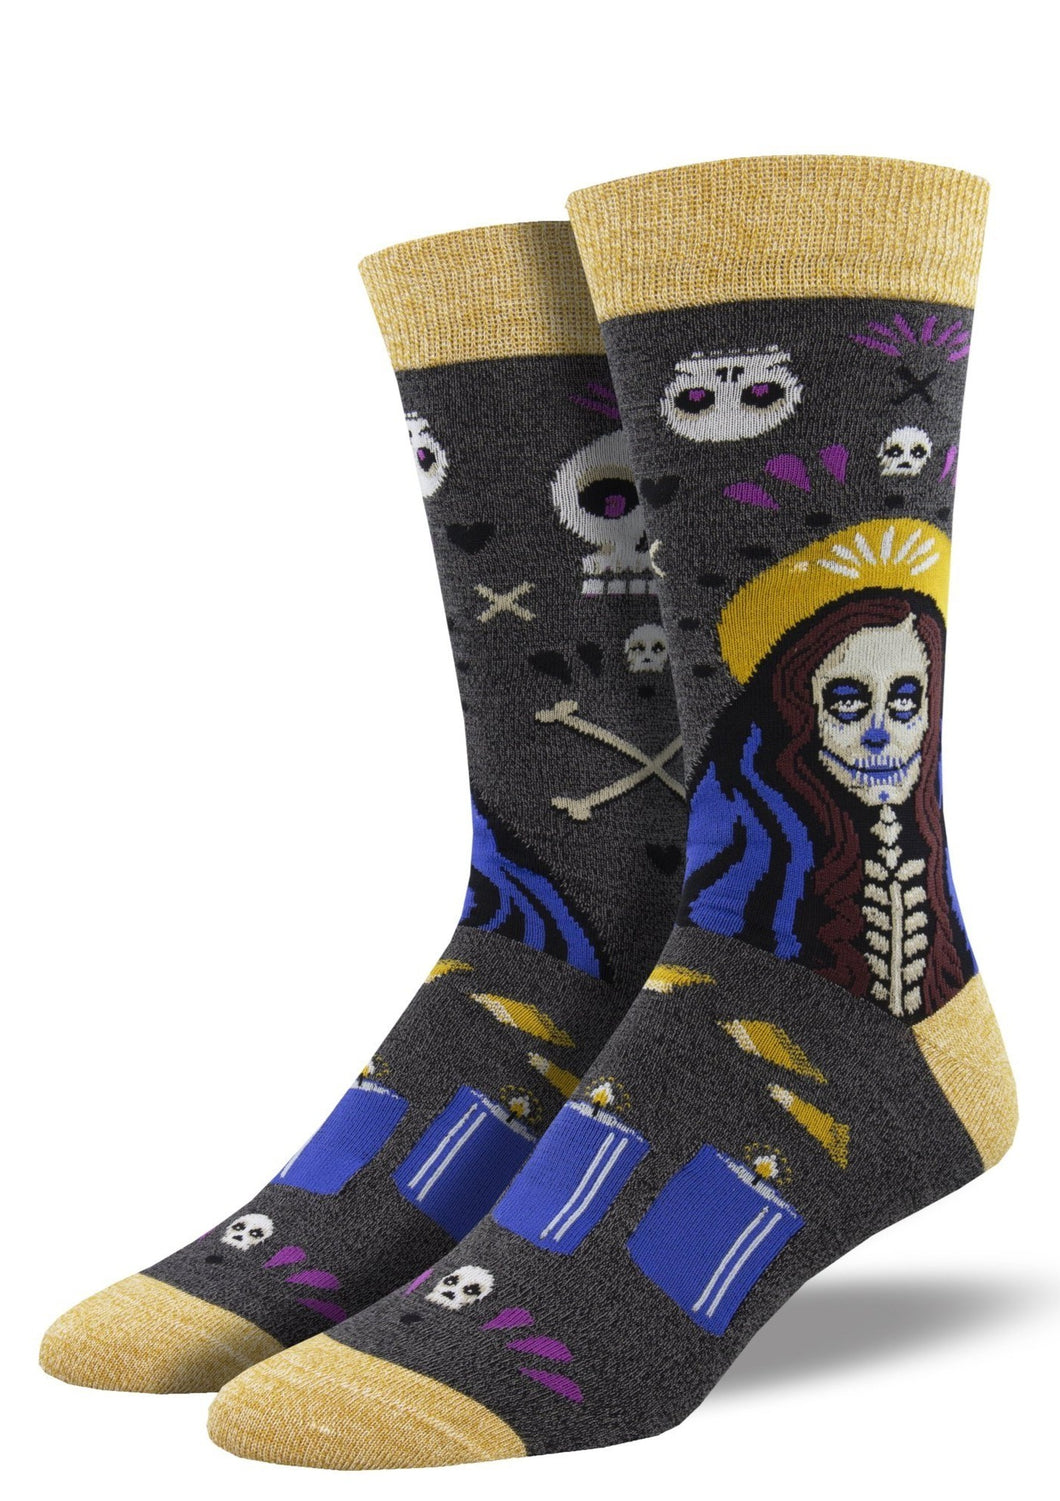 Heather Grey with Vudu Skeleton Witch Art.  Soft, Breathable, Moisture Wicking, Antibacterial, Hypoallergenic, Amazing Socks! One Size Fits Most (Men's 7-13) Fabrication: 66% Rayon from Bamboo, 32% Nylon, 2% Spandex SockSmith $22.00